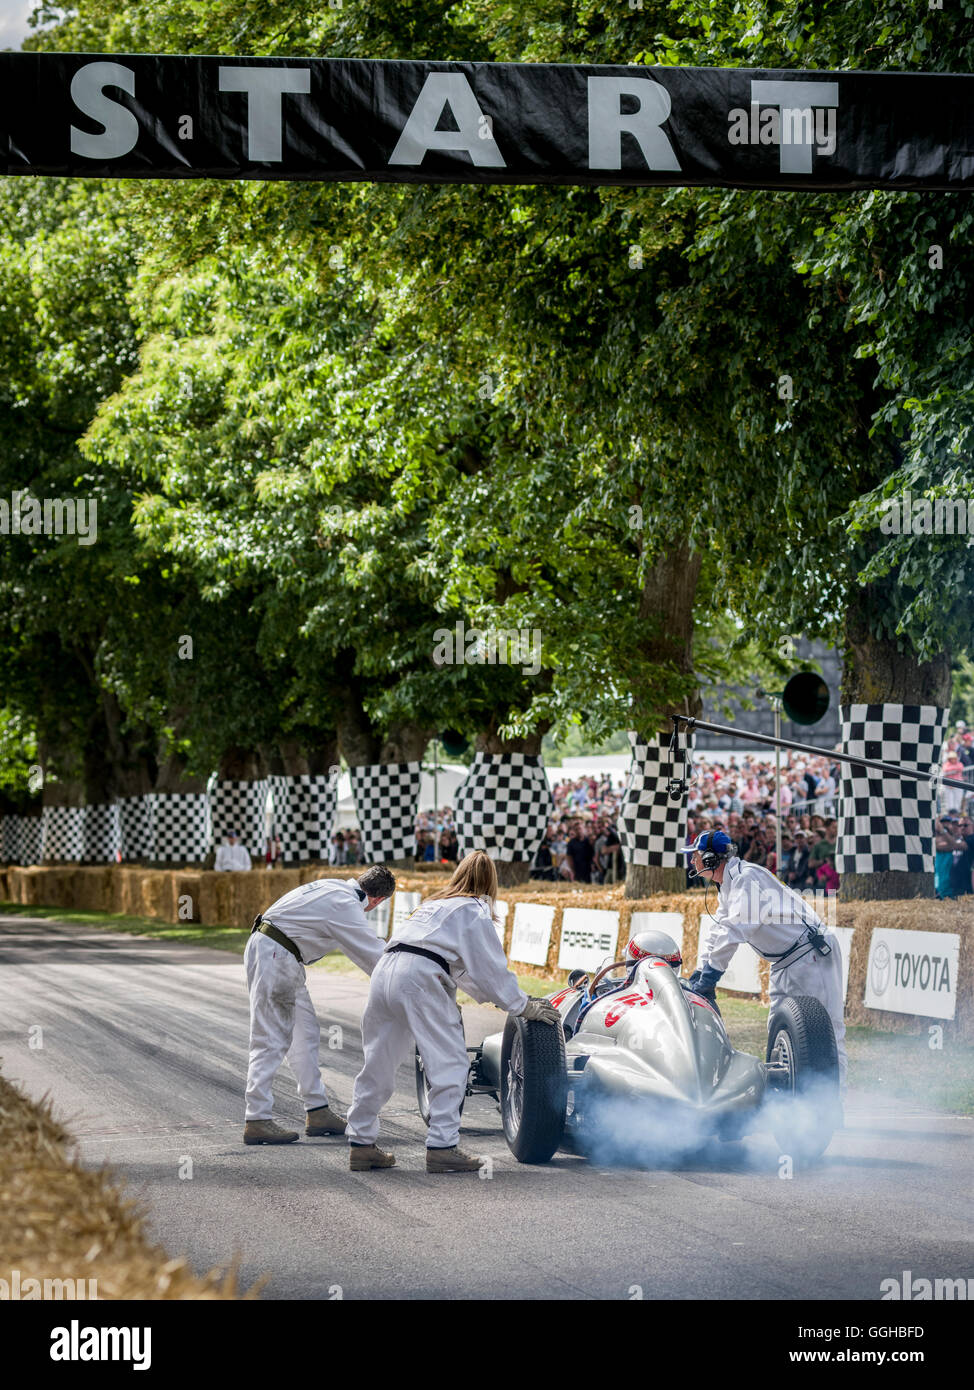 Sir Jackie Stewart in Mercedes Benz W165 at the start, Goodwood Festival of Speed 2014, racing, car racing, classic car, Chiches Stock Photo